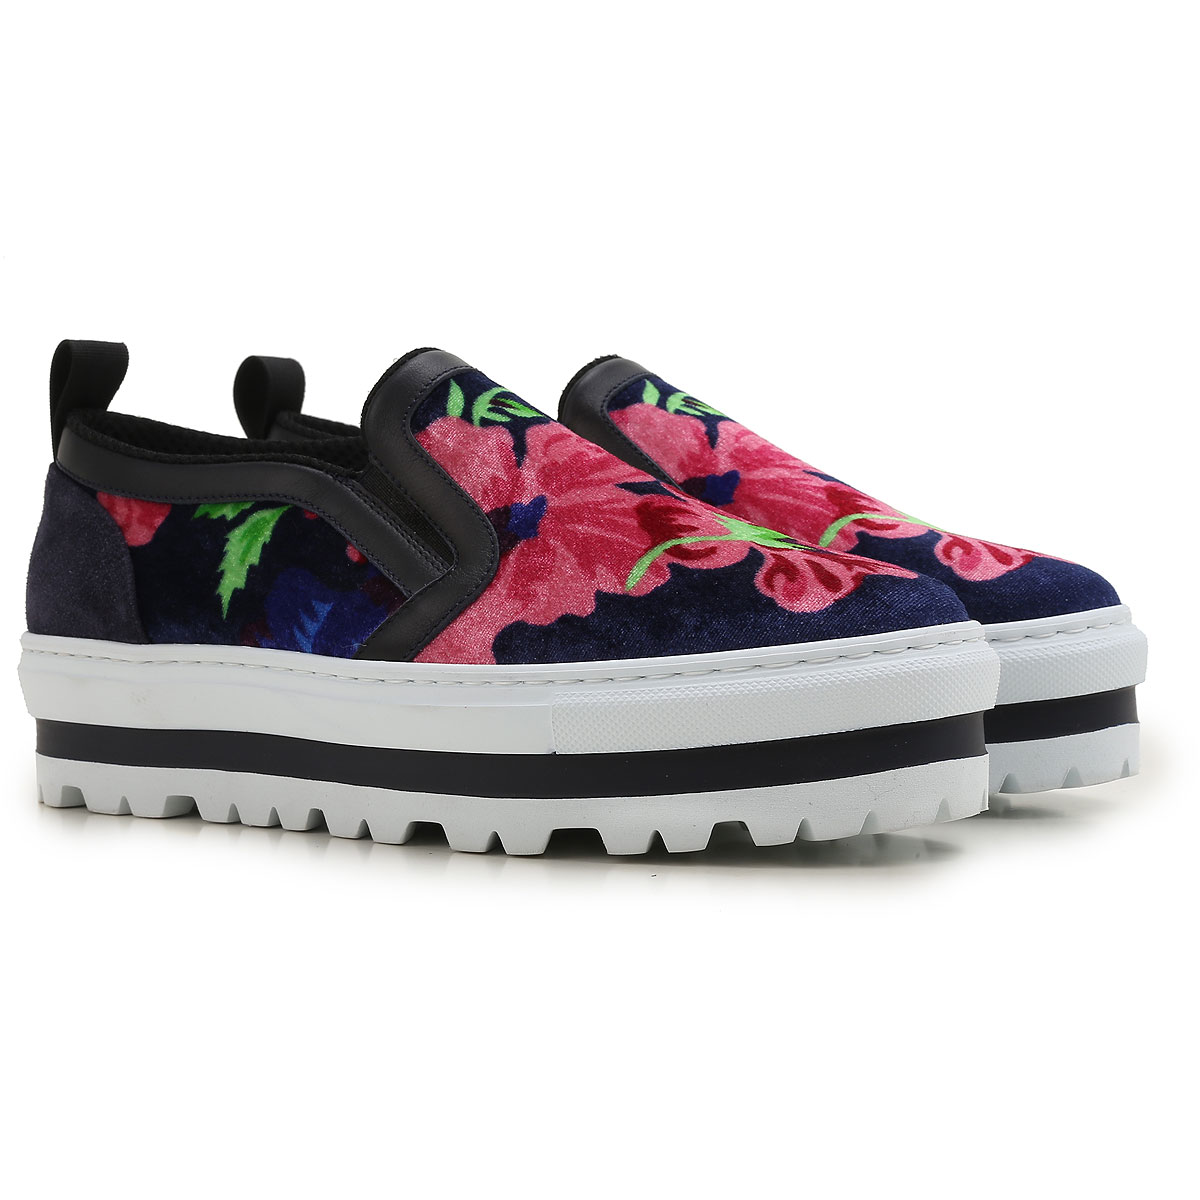 Womens Shoes MSGM, Style code: 2142mds08-400-